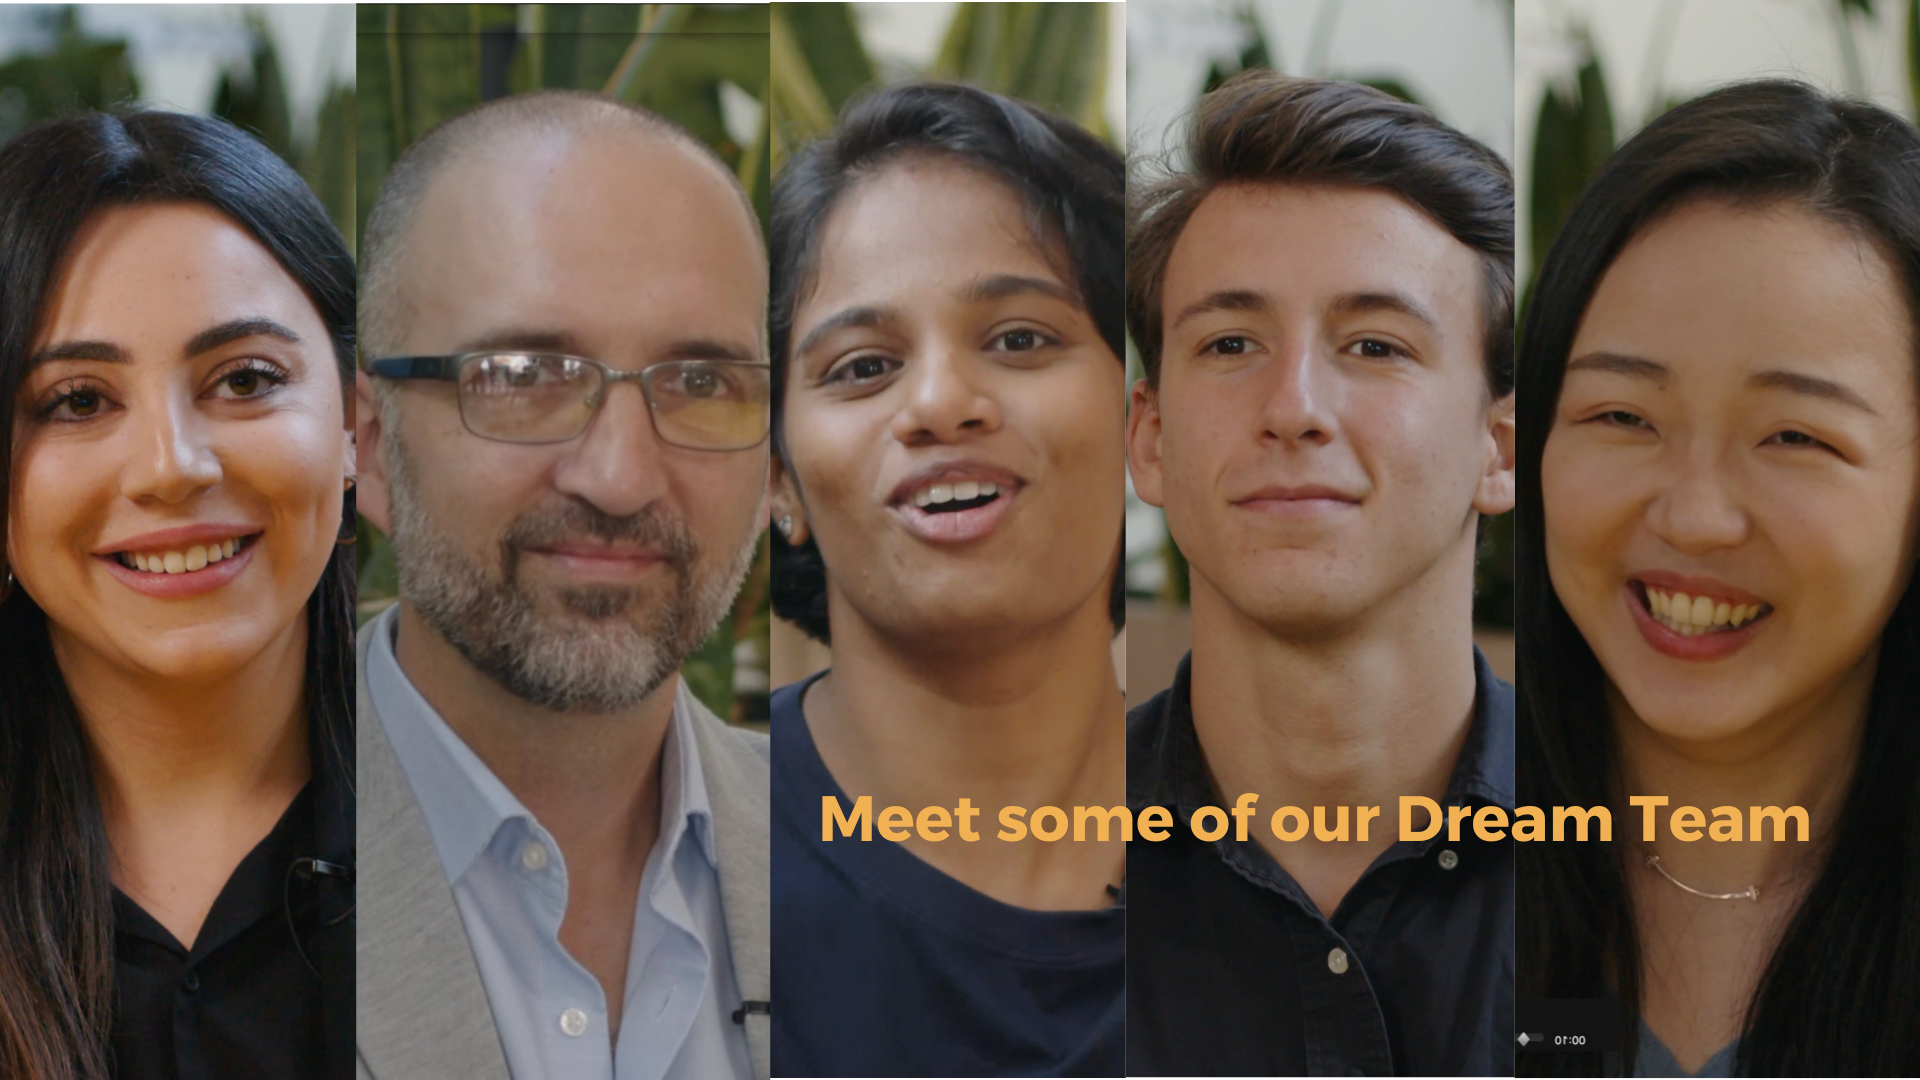 Meet some of our Dream Team